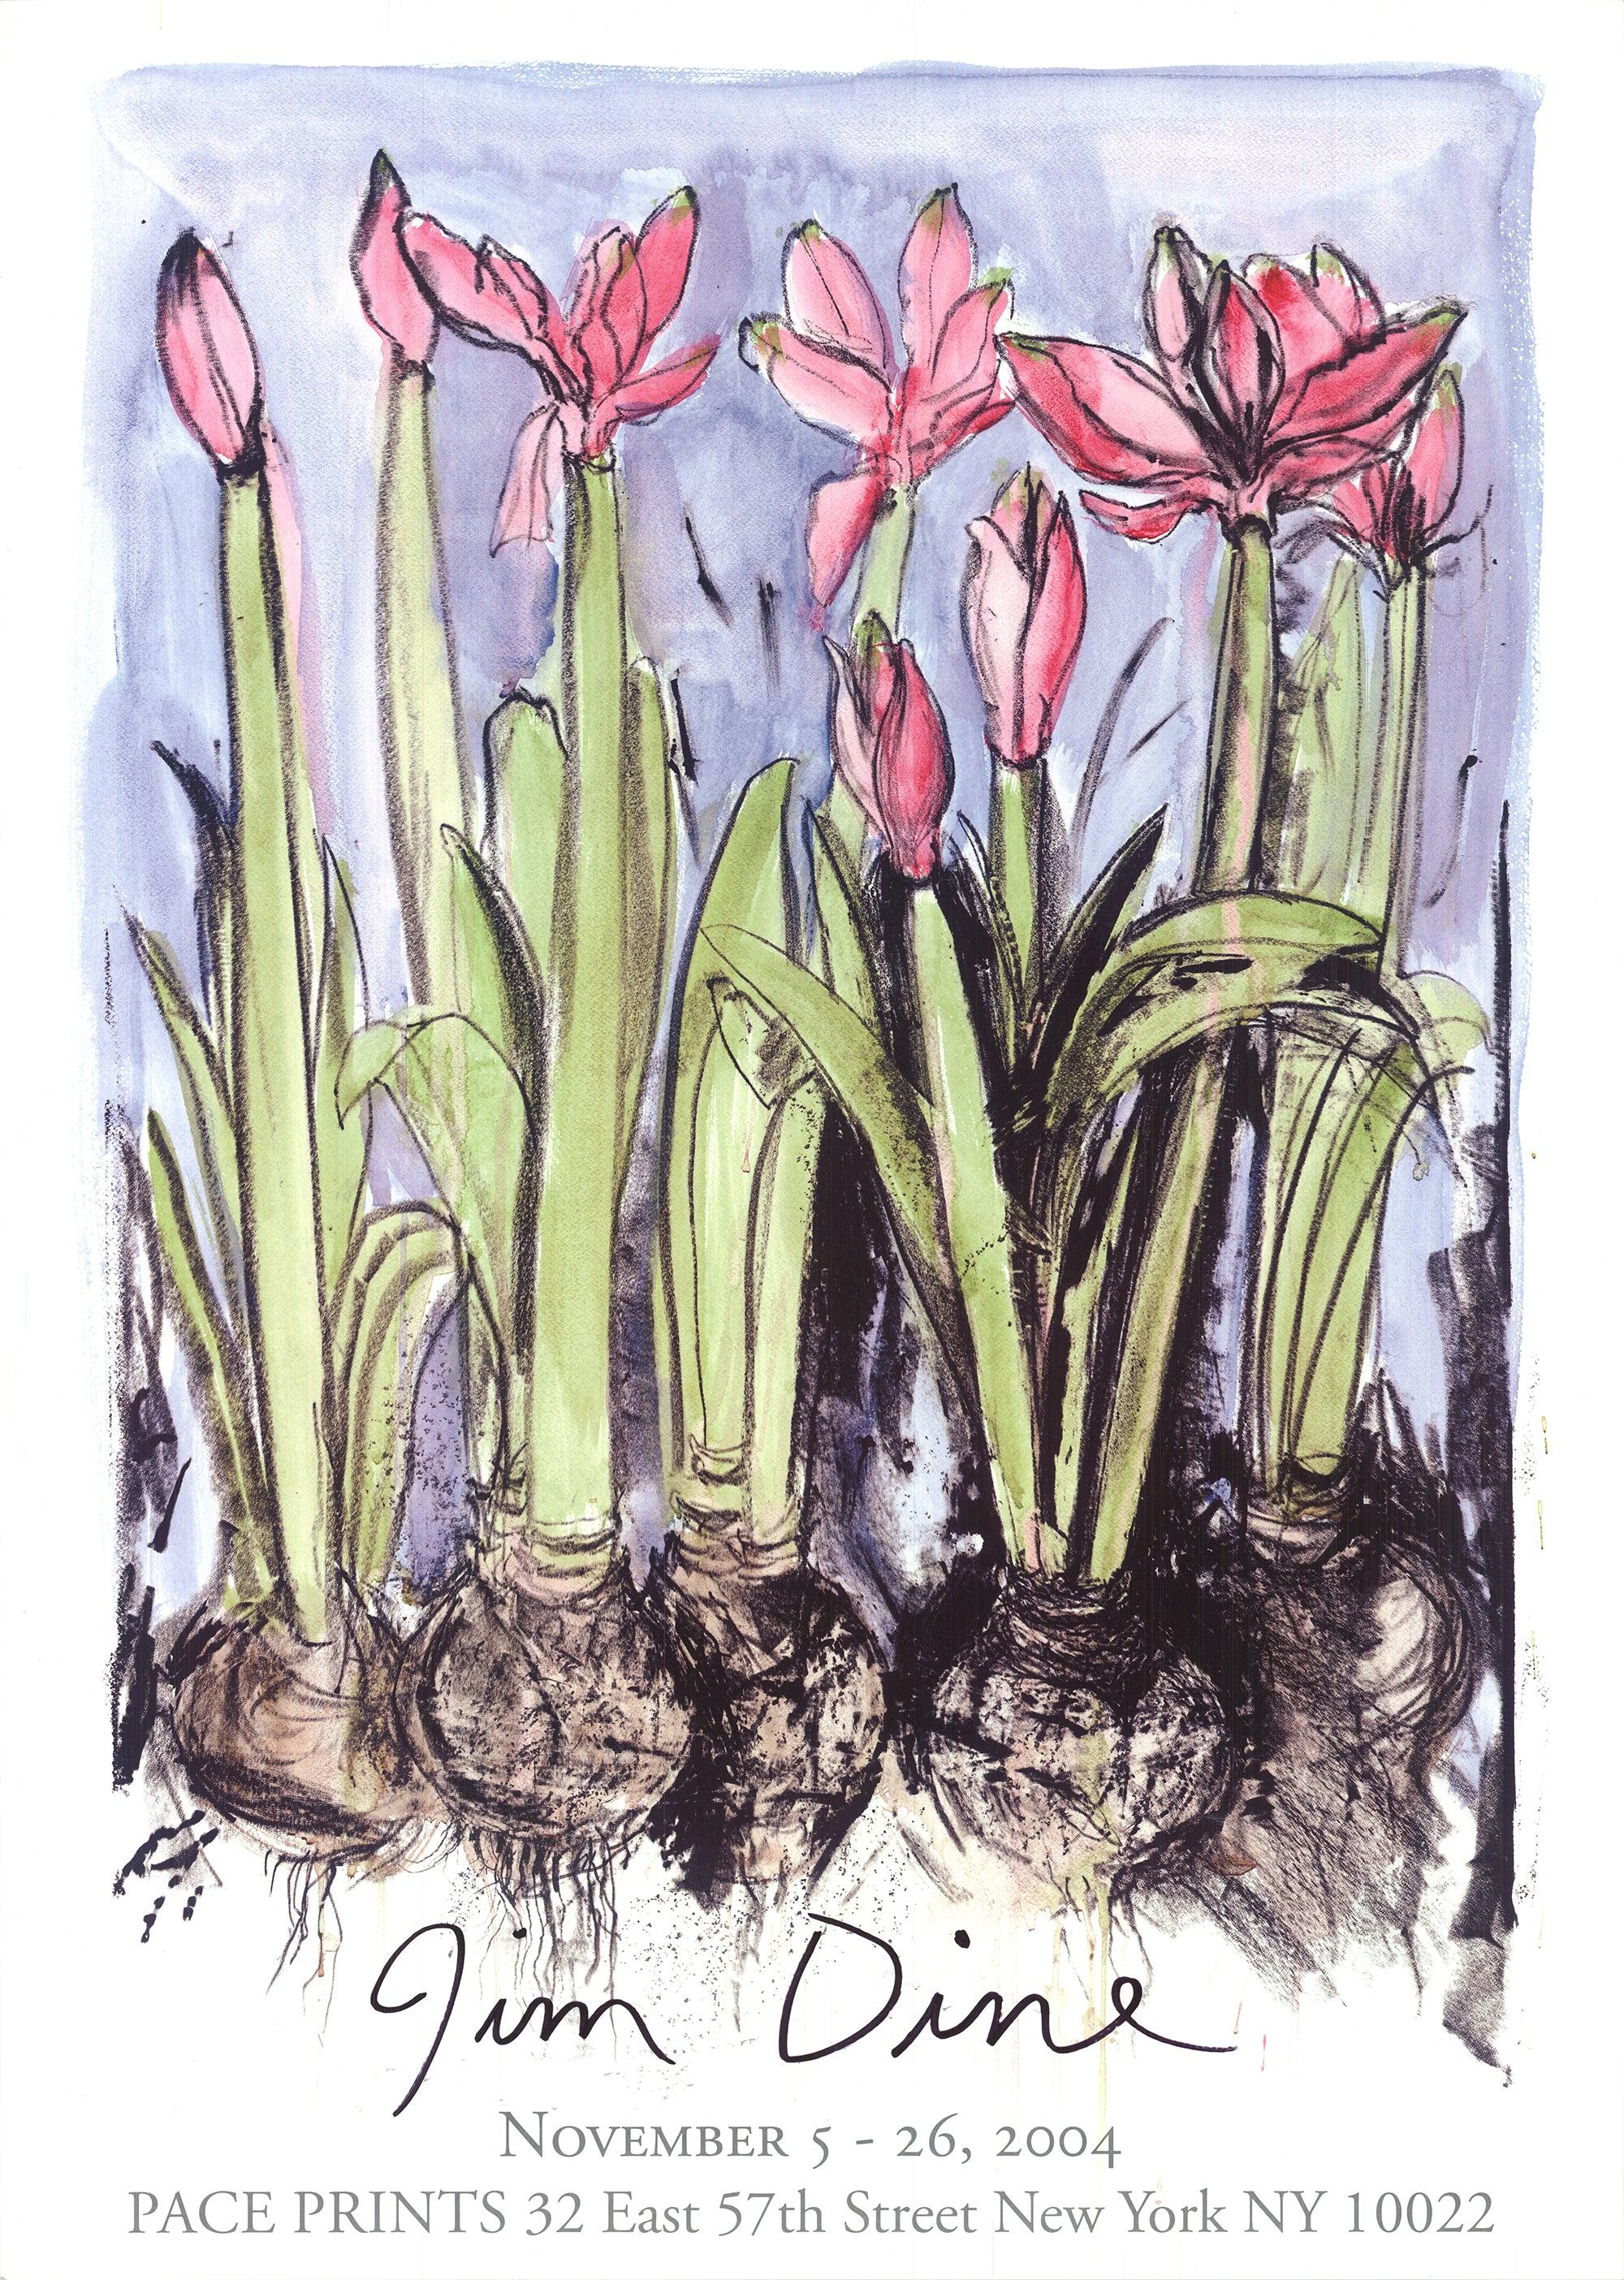 Jim Dine's exhibition at Pace Prints in November 2004, featuring his artwork "Anemones," highlighted the artist's enduring fascination with flowers and botanical motifs.

Jim Dine is renowned for his profound exploration of flowers as subjects in